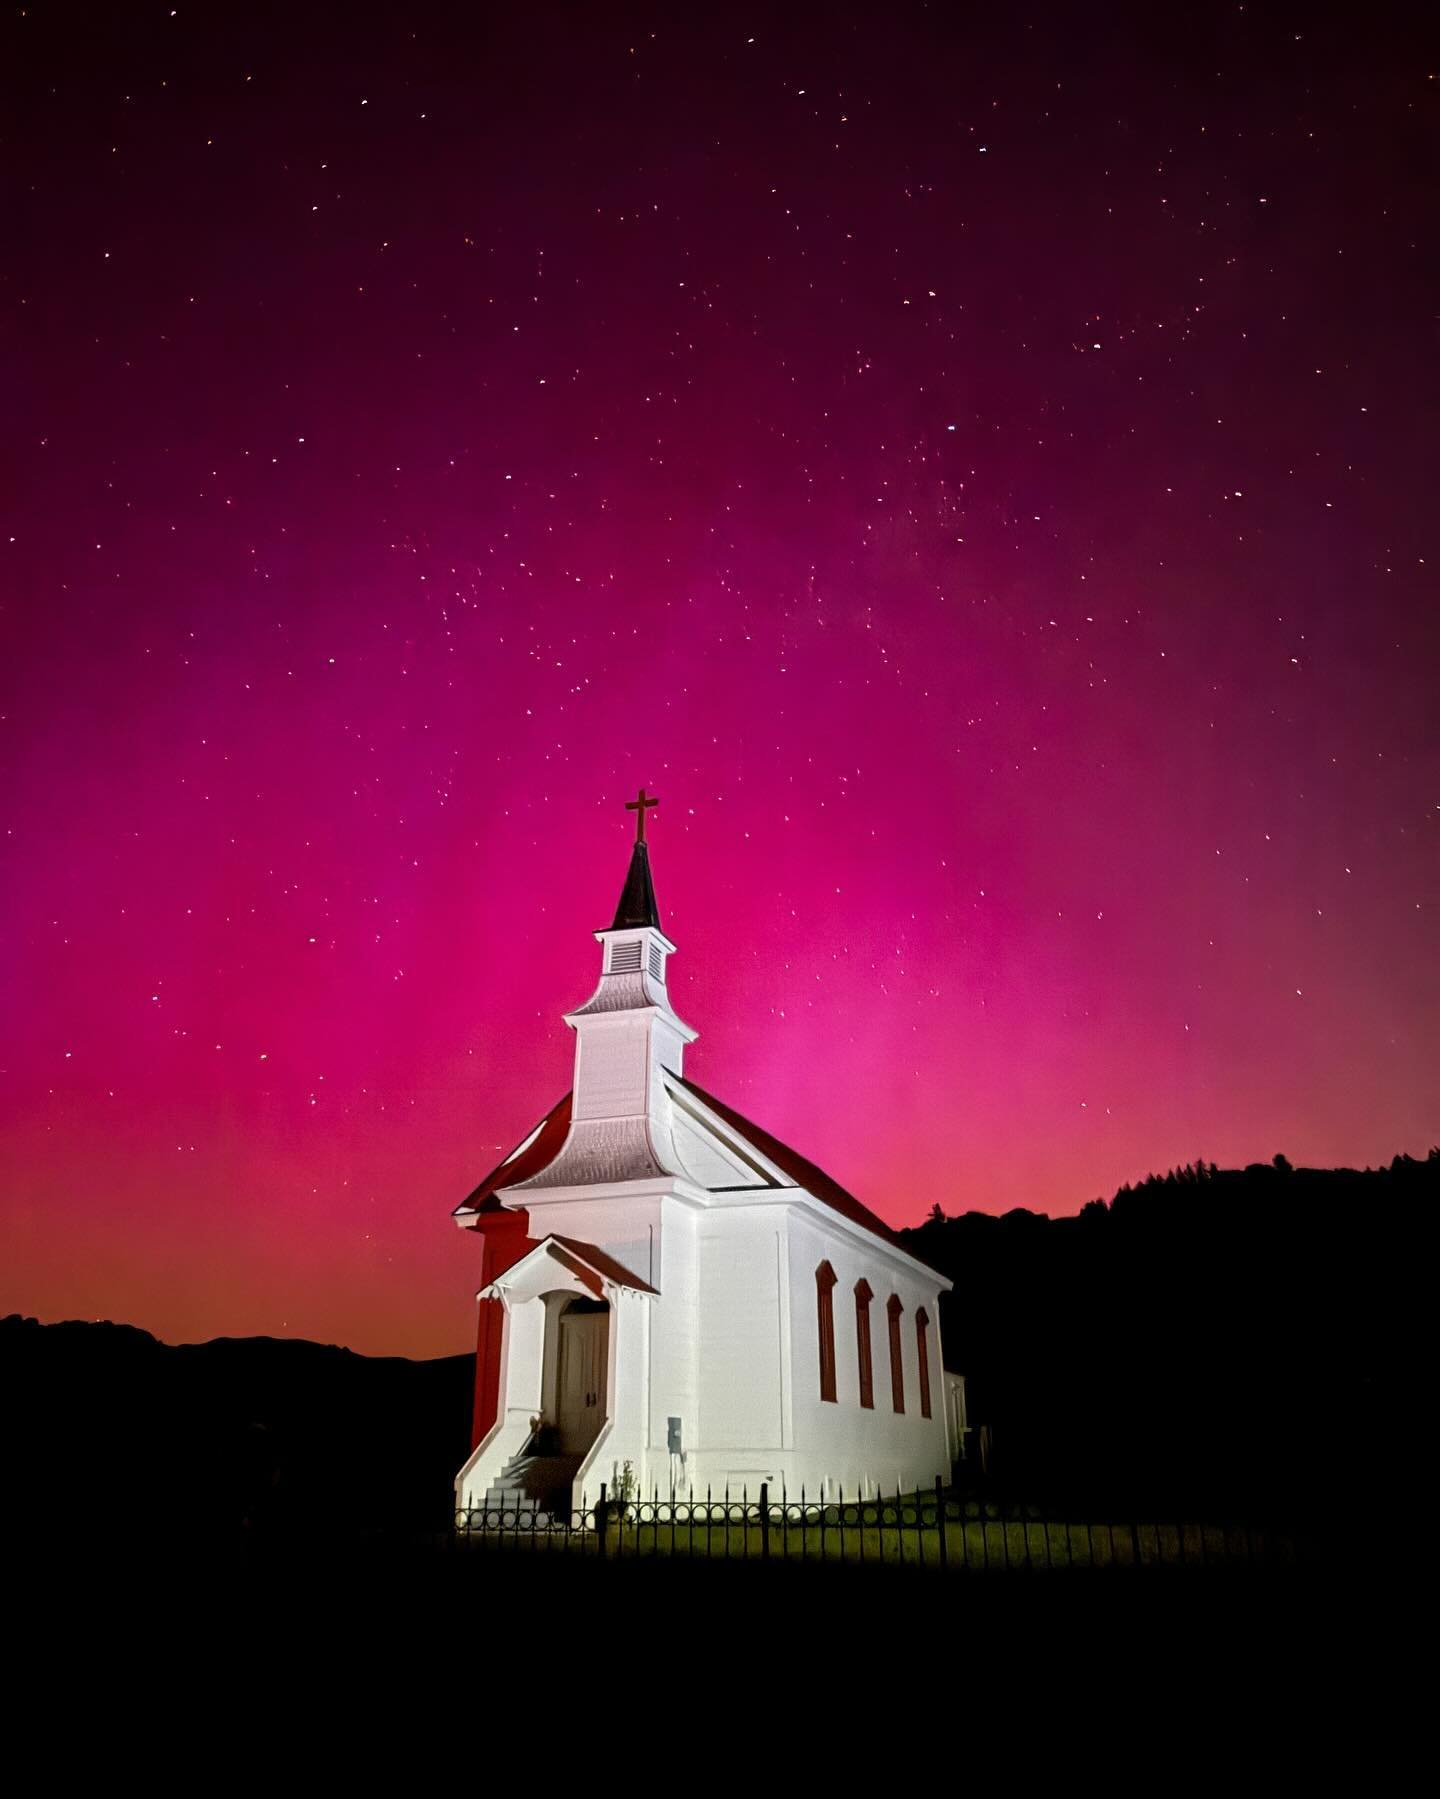 The Aurora Borealis put on quite a show in the San Francisco Bay Area last night! My friend and I drove up to Point Reyes to get away from the city lights and stopped somewhere along the way when we saw the Northern Lights in the sky around 1 am. All